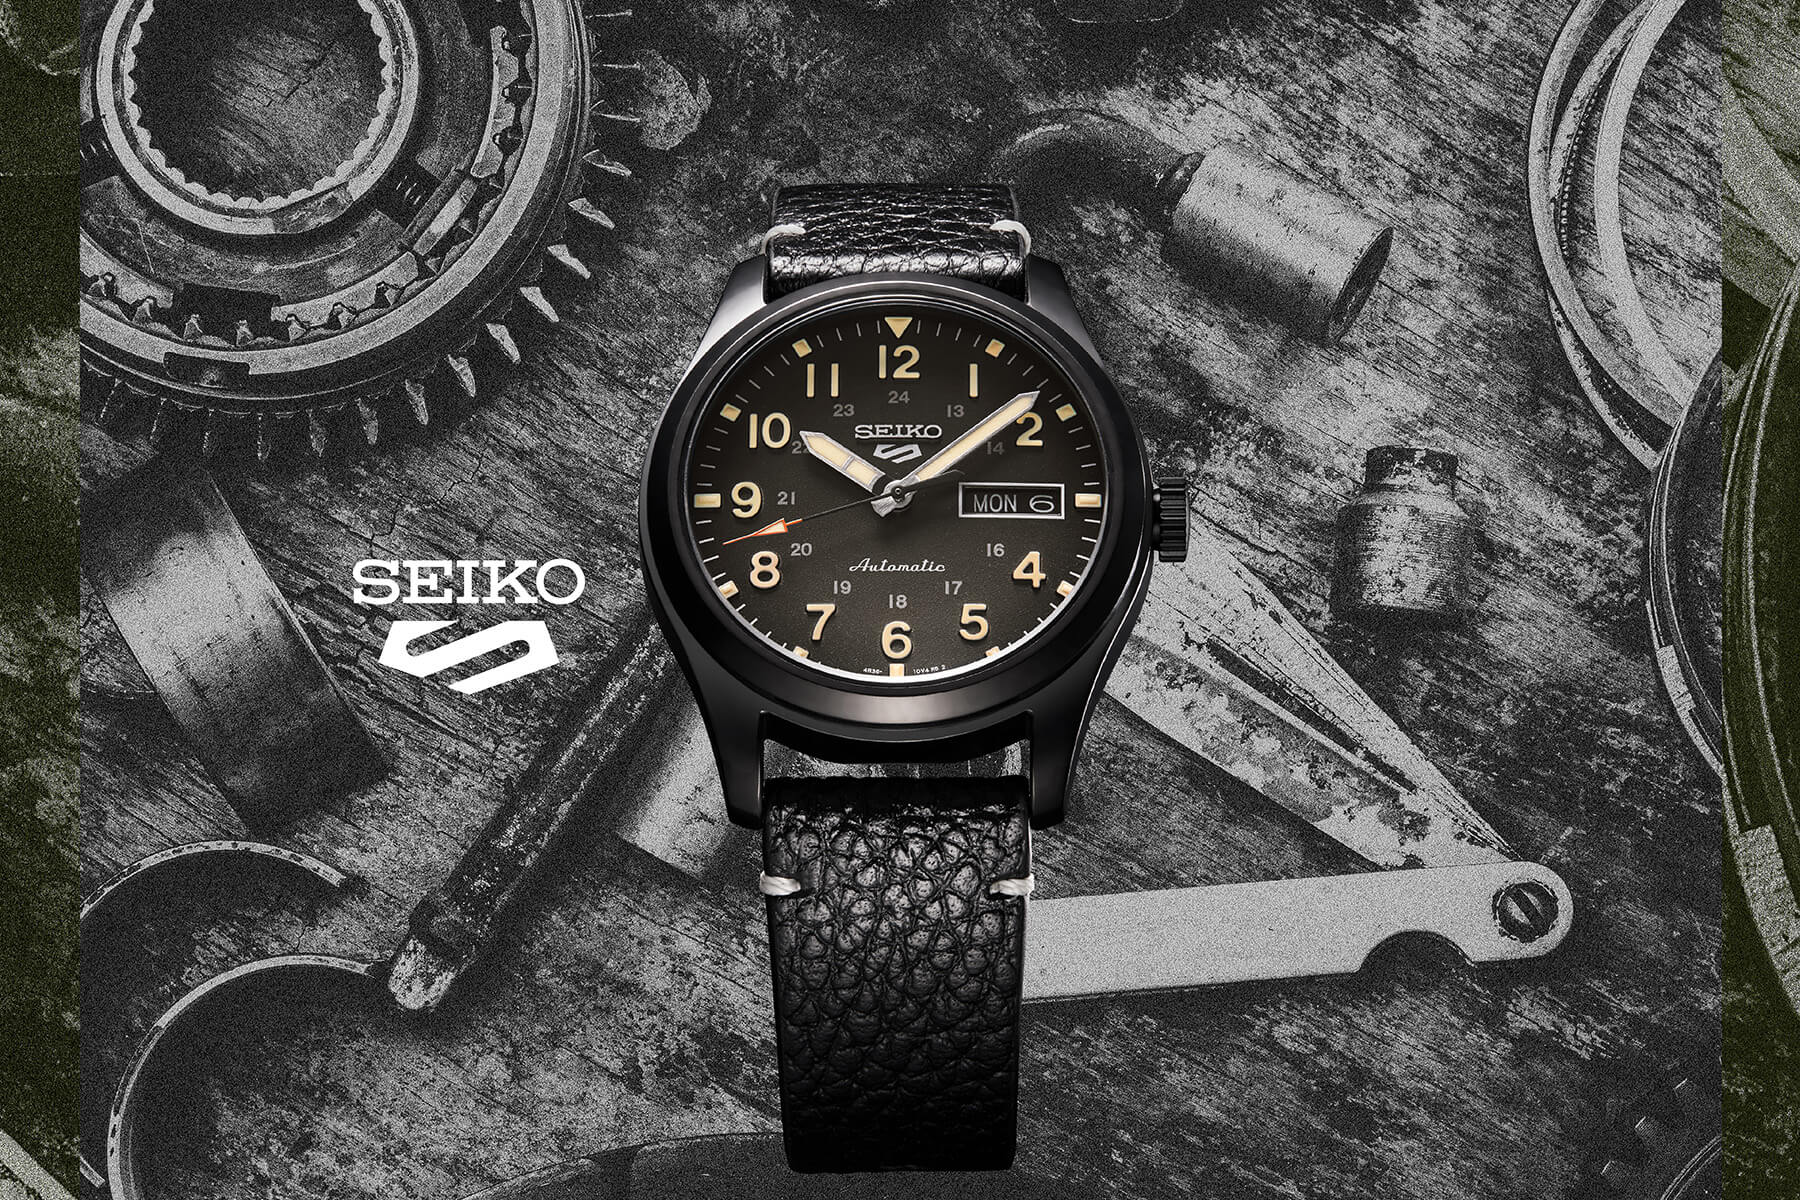 Seiko 5 Sports Automatic Watches - Go beyond The Norm